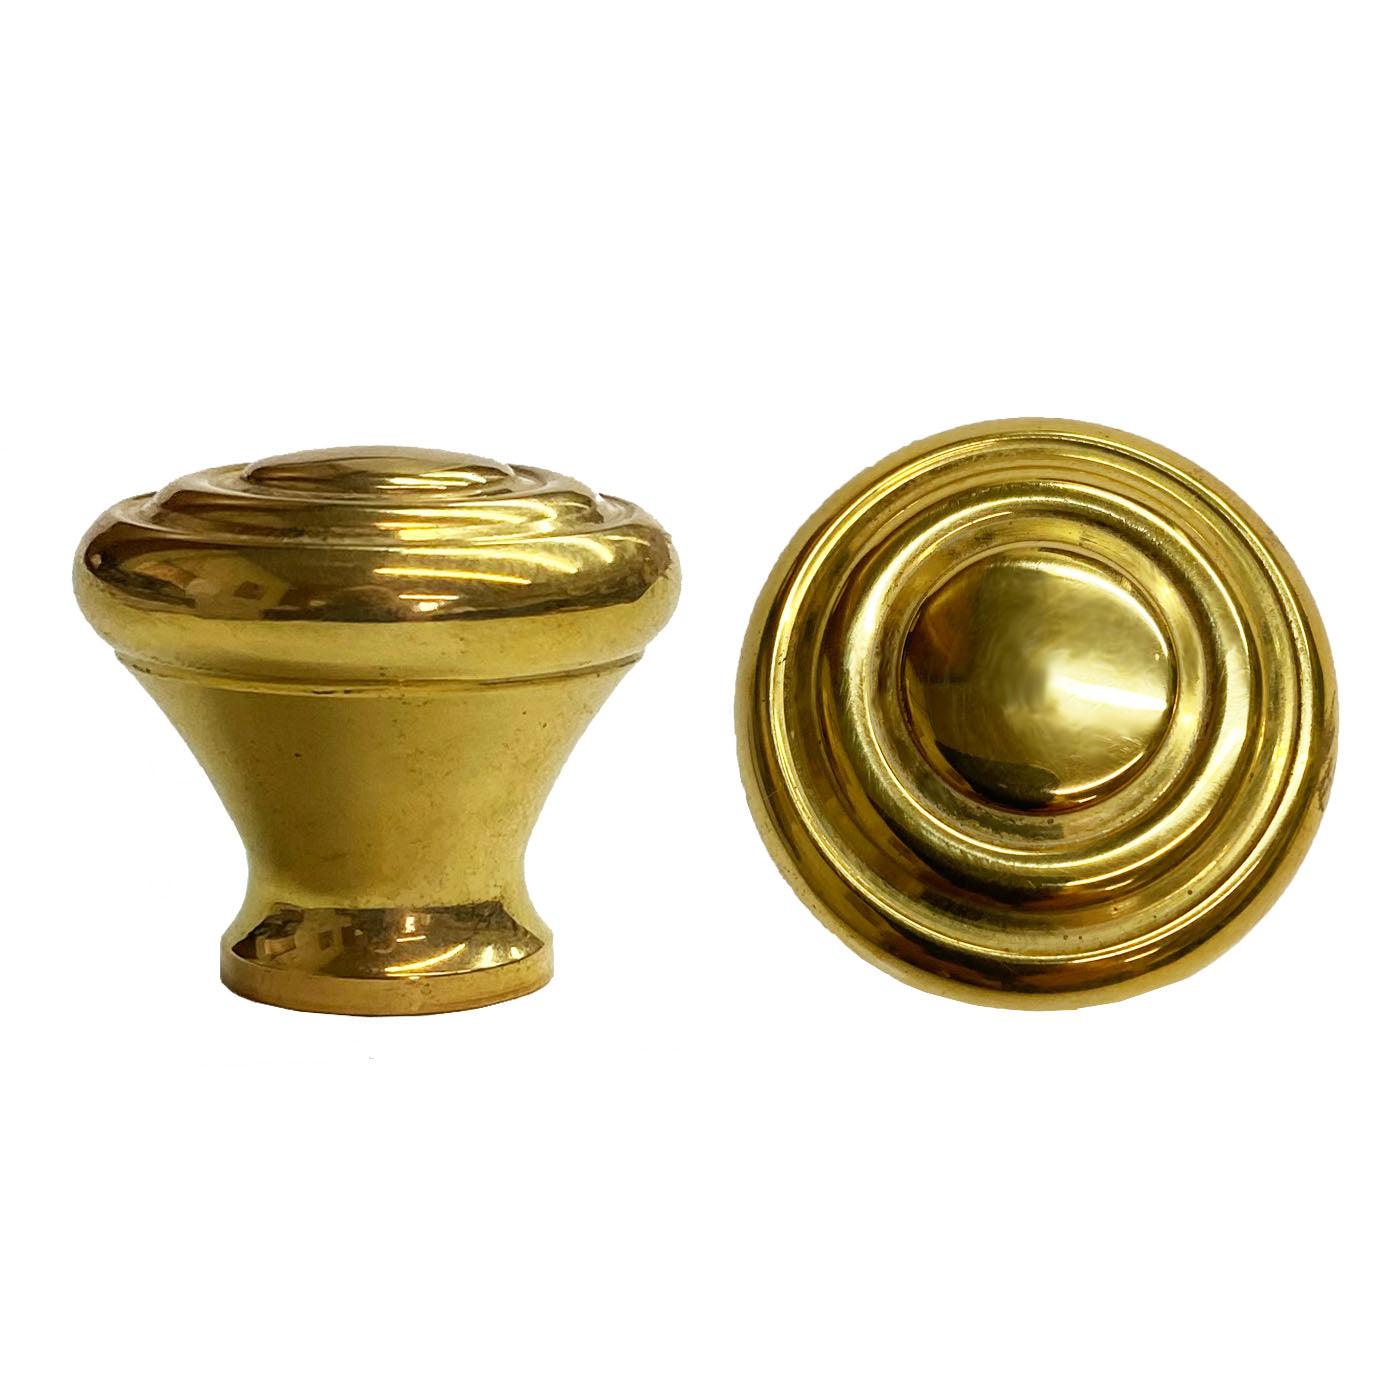 Brass Cabinet Knobs add Value & Classic Style - Paxton Hardware